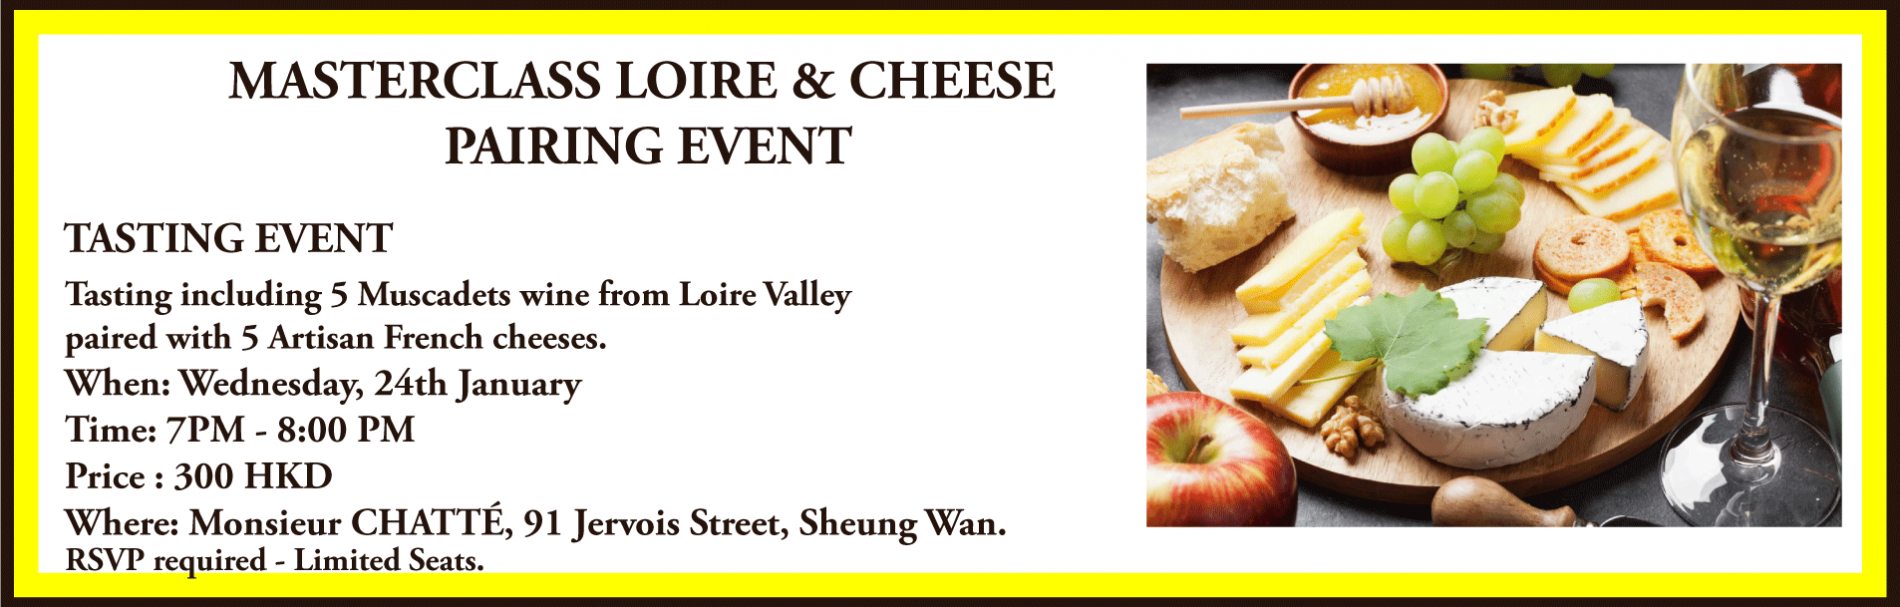 LOIRE VALLEY AND CHEESE MASTERCLASS PAIRING EVENT 